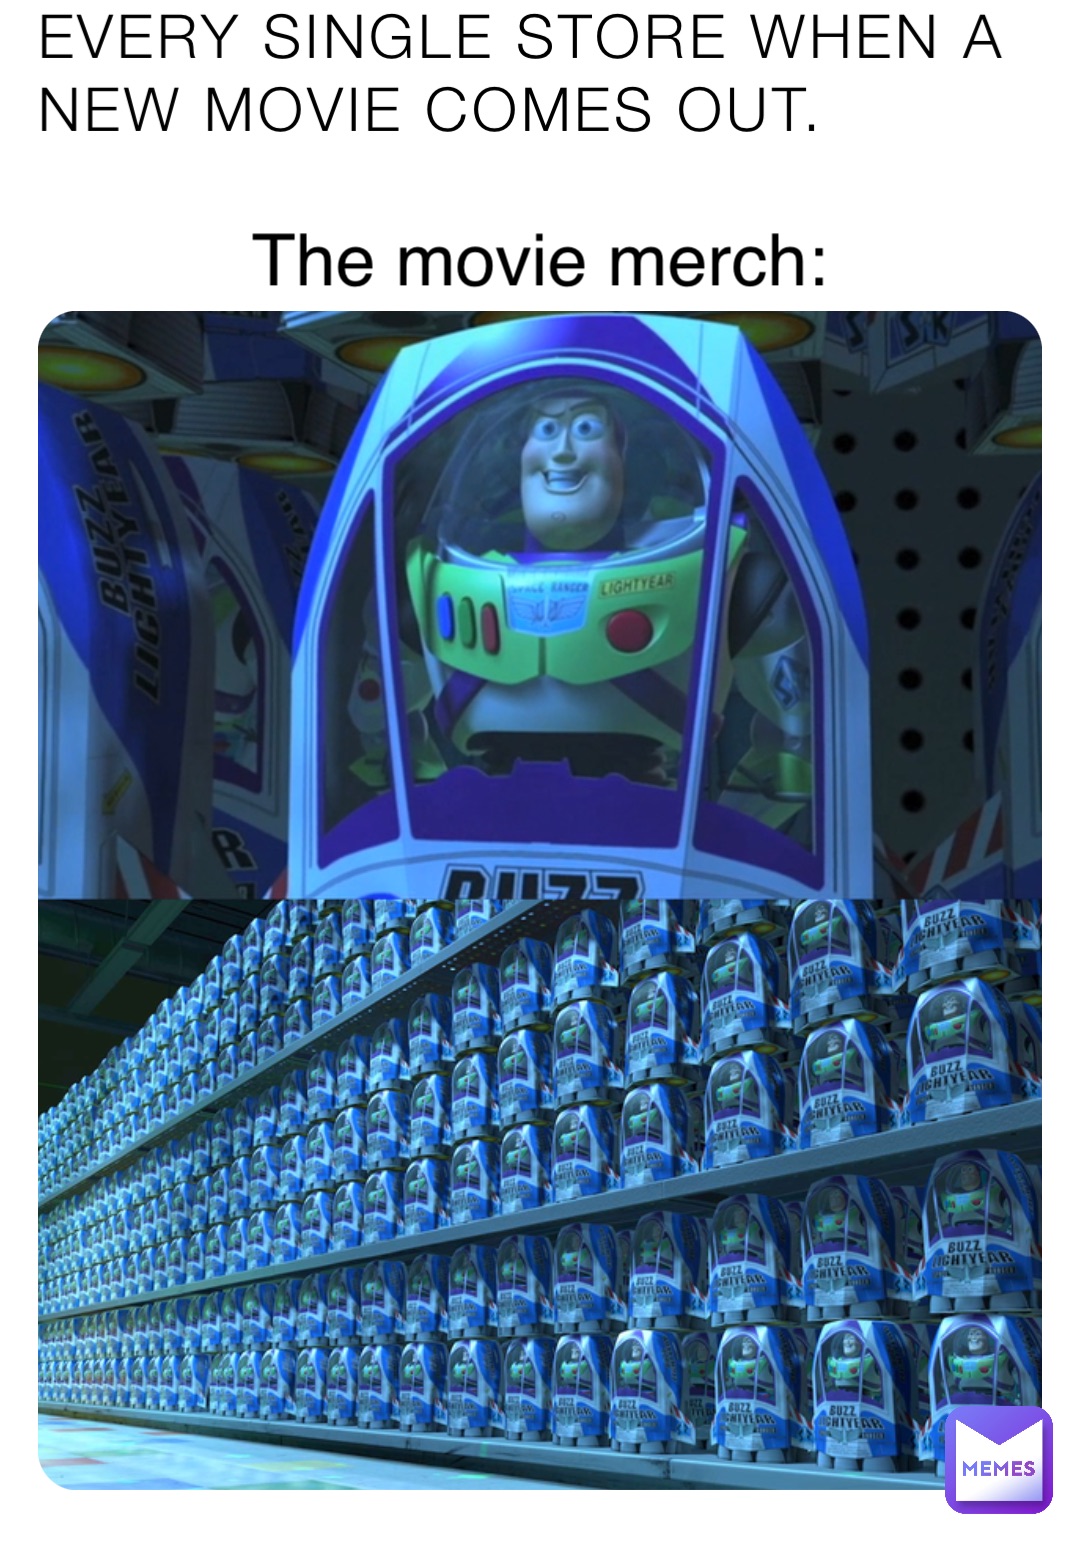 Every single store when a new movie comes out. The movie merch: